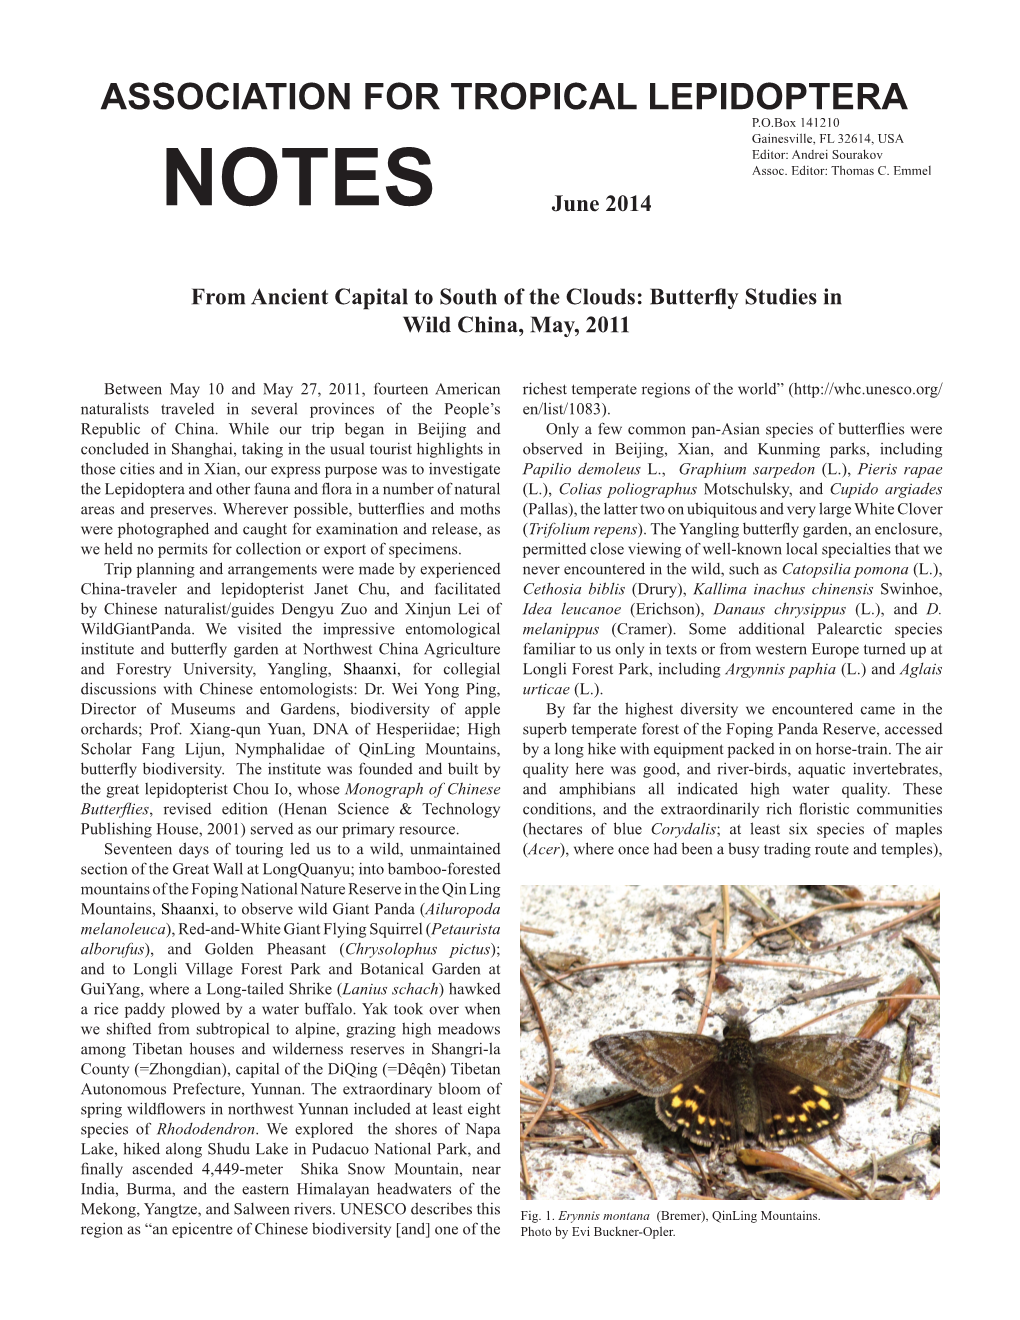 ASSOCIATION for TROPICAL LEPIDOPTERA NOTES June 2014